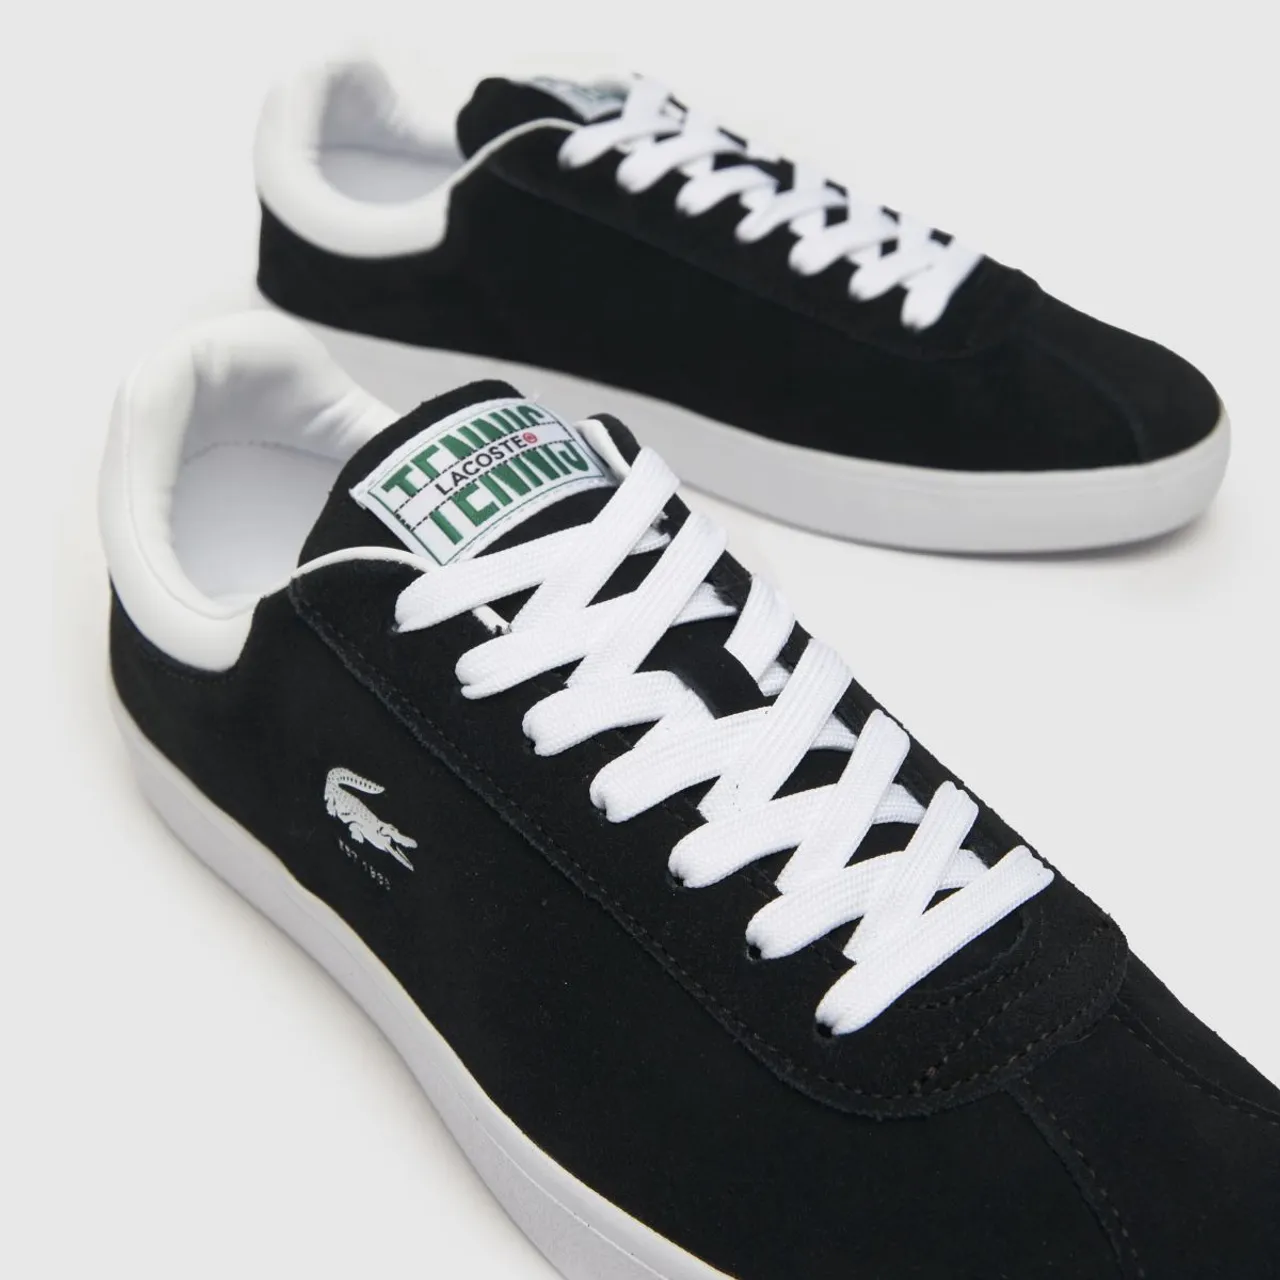 Lacoste Baseshot Trainers In Black & White